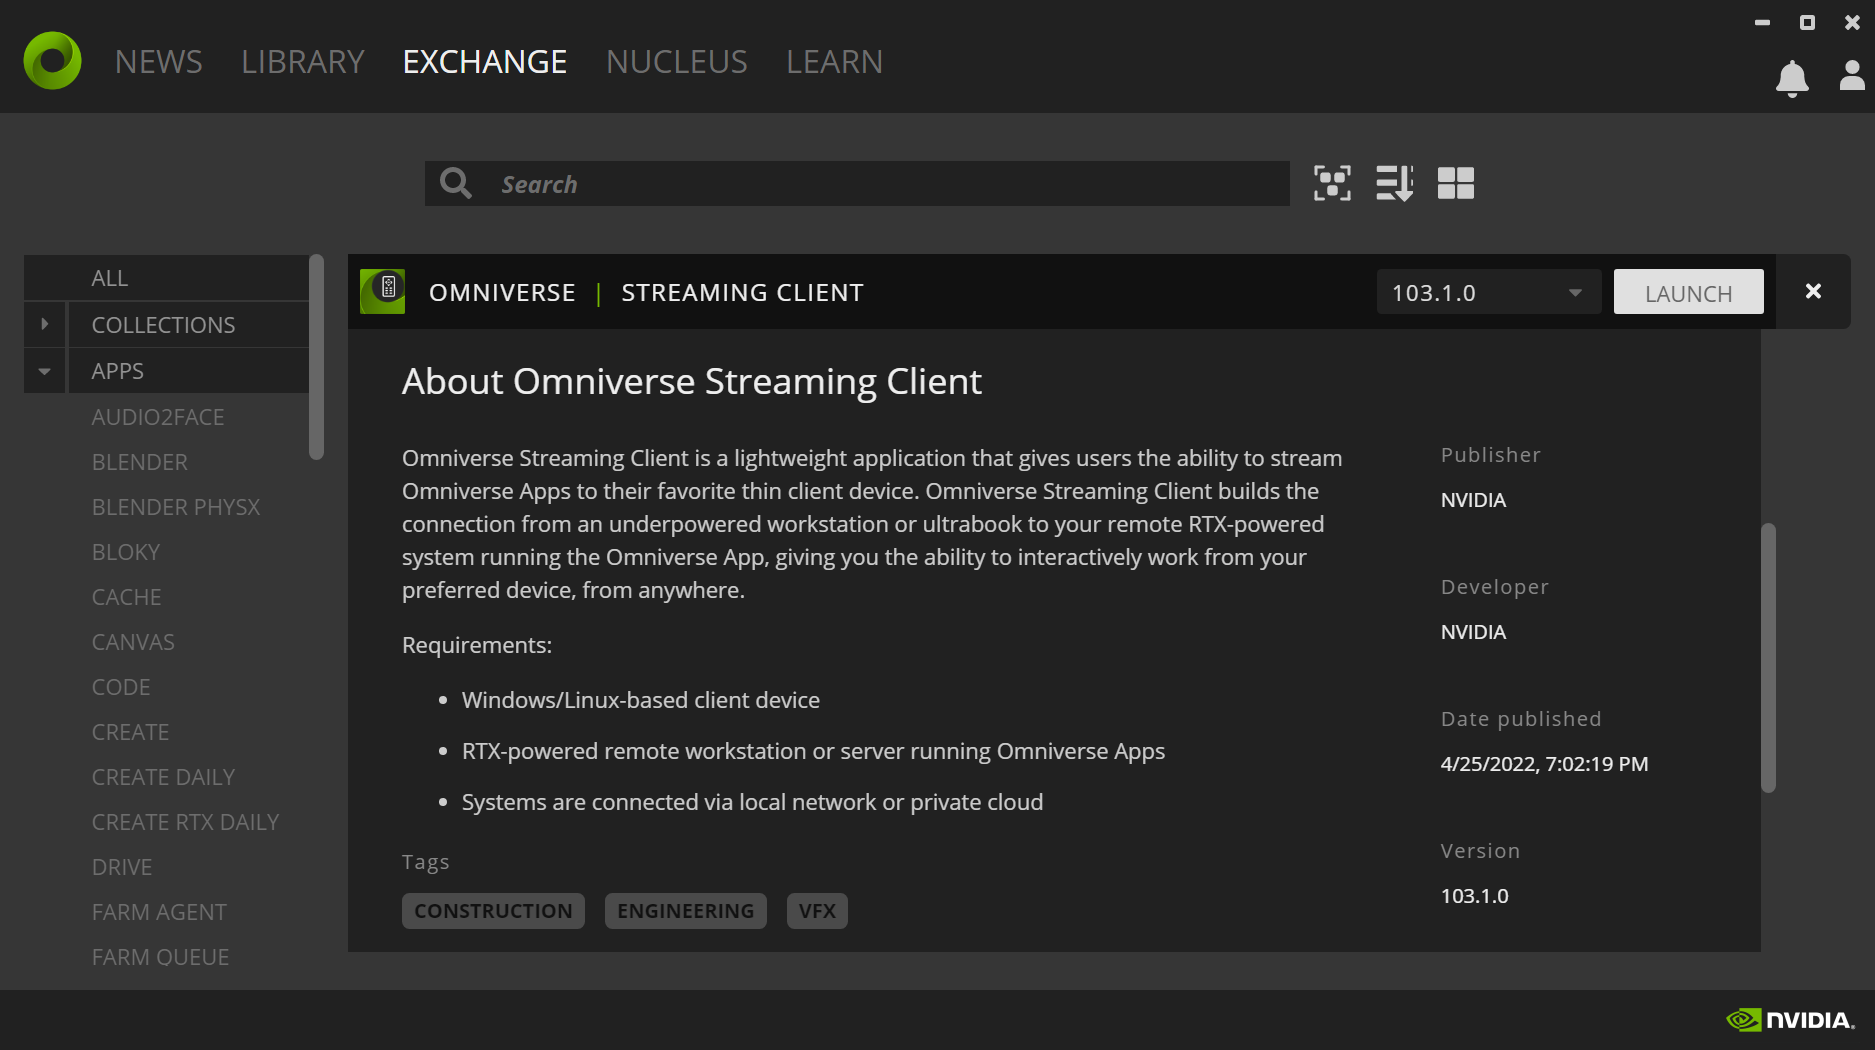 Omniverse Streaming Client Launcher